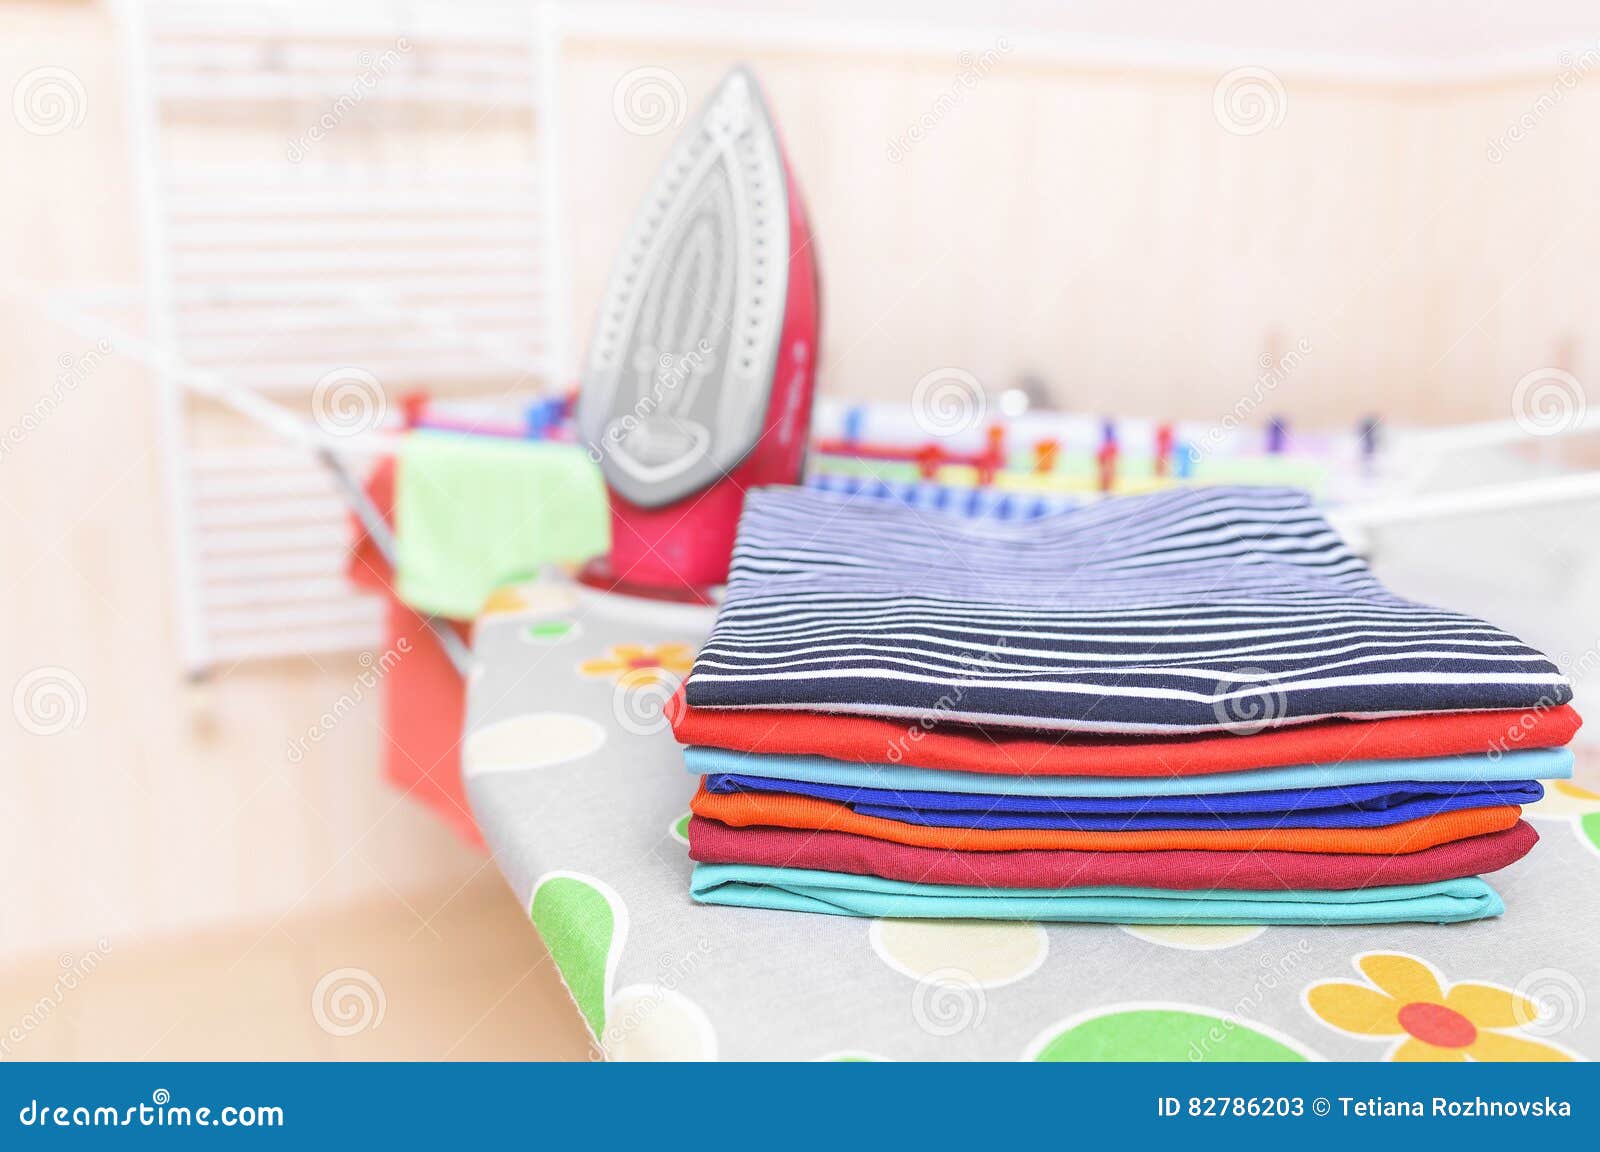 Ironed clothes on an ironing board.